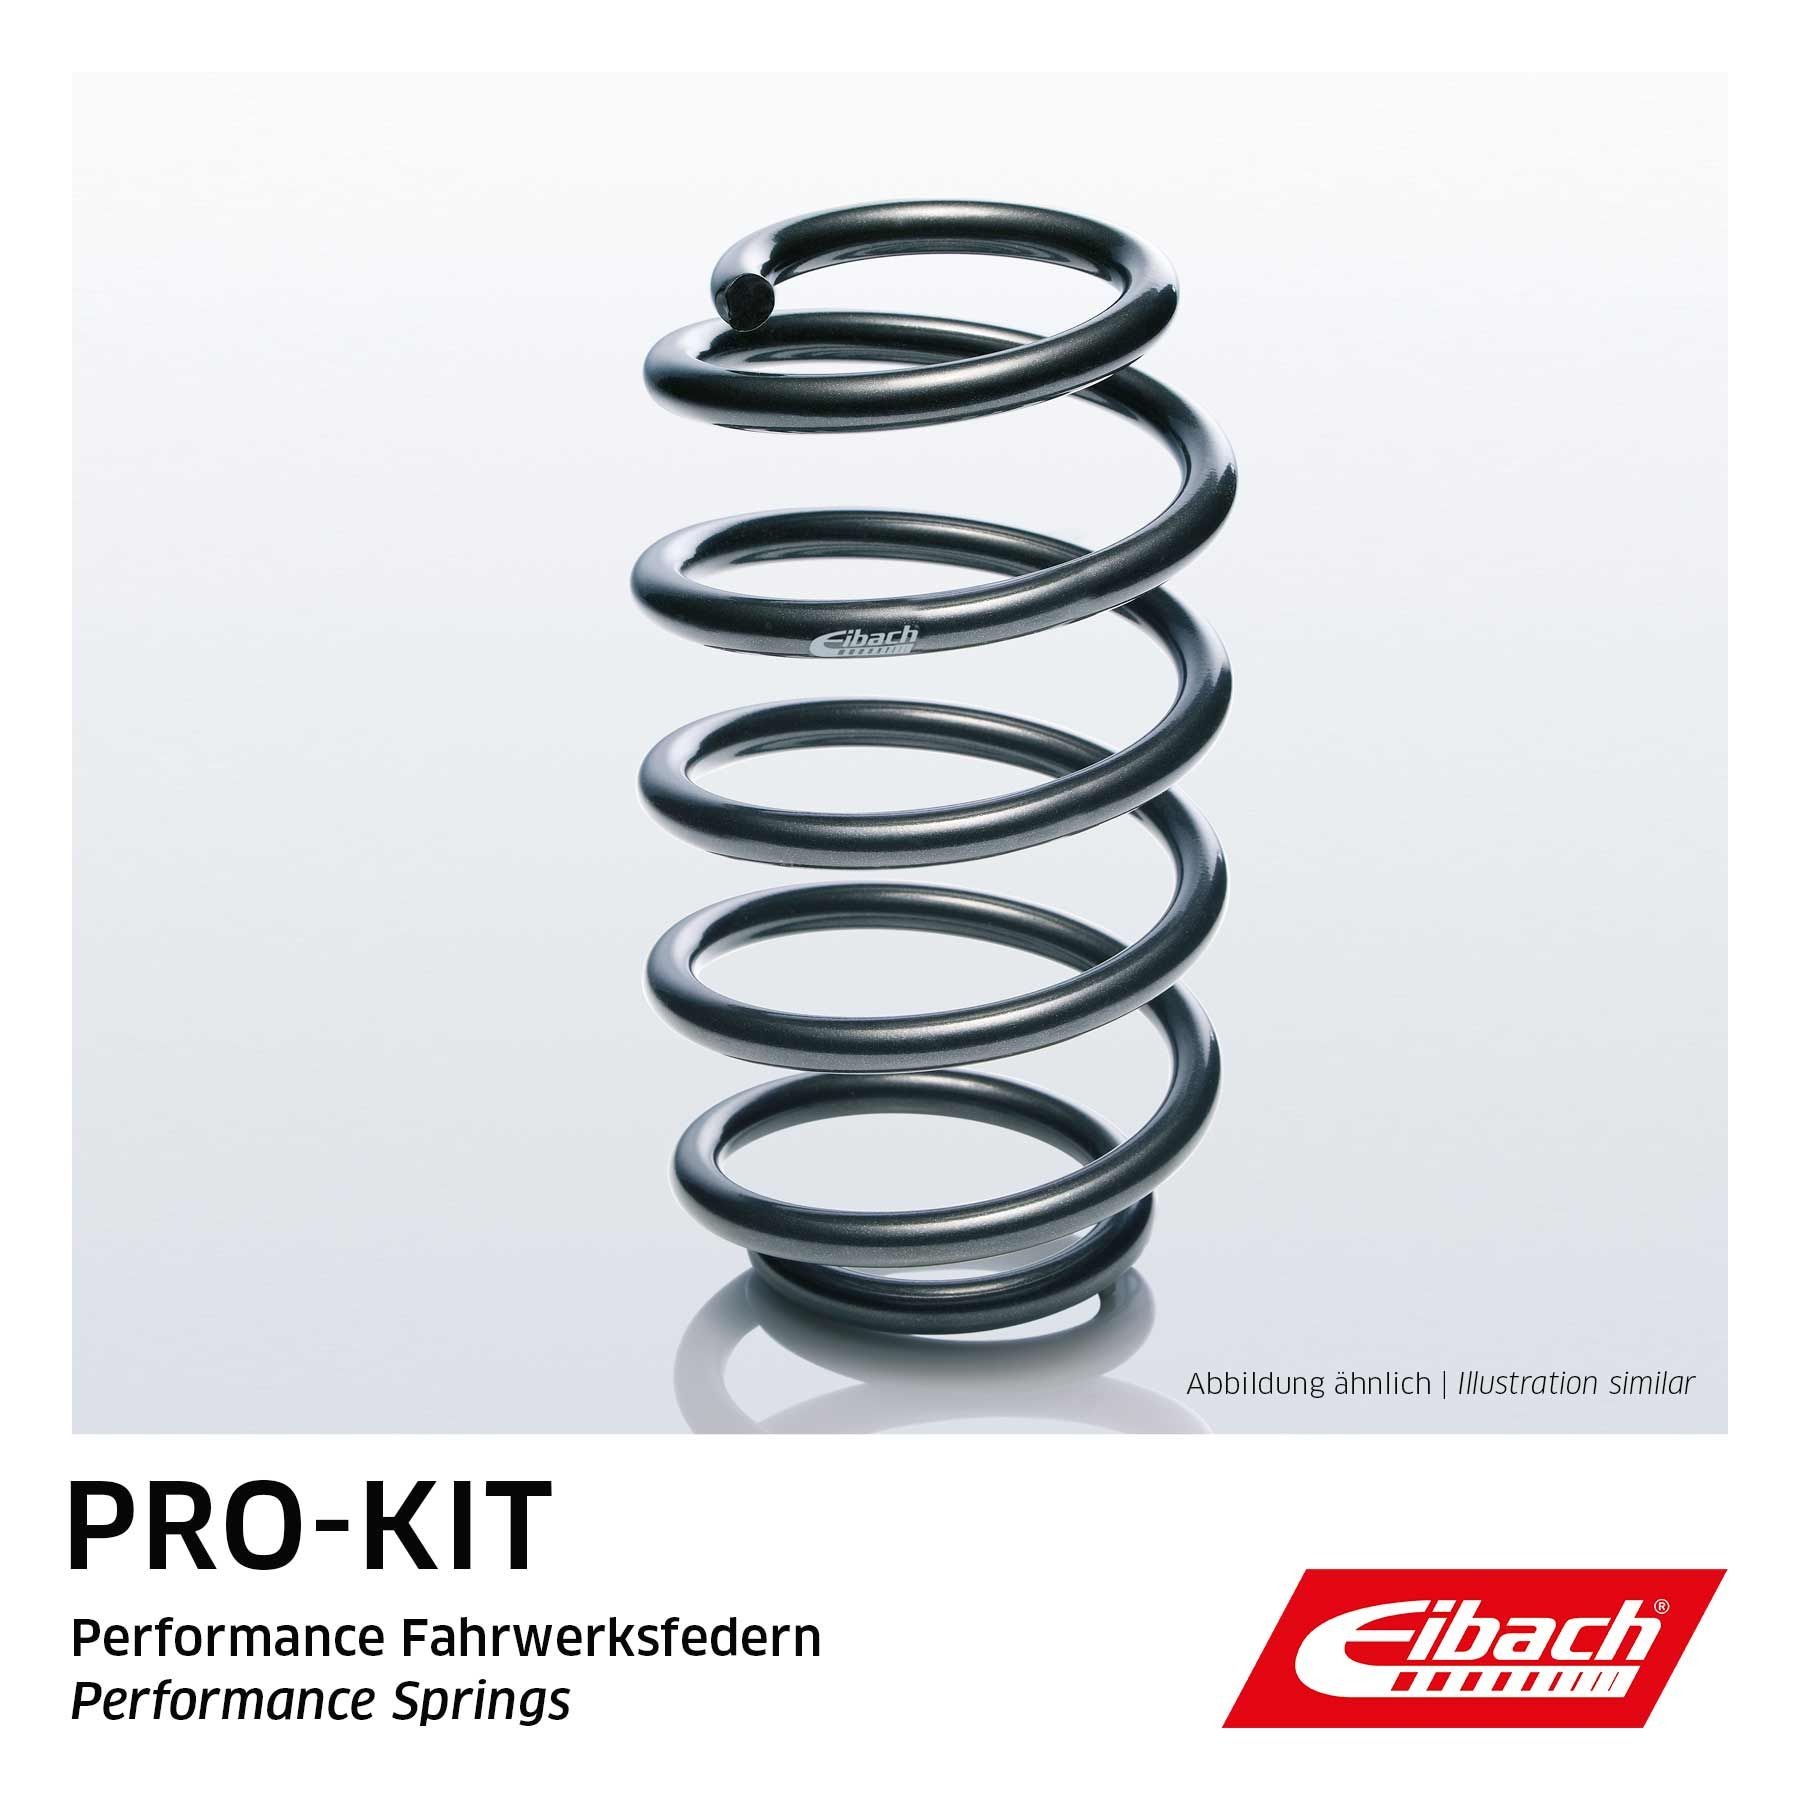 Peugeot TRAVELLER Shock absorption parts - Coil spring EIBACH F11-65-036-01-RA